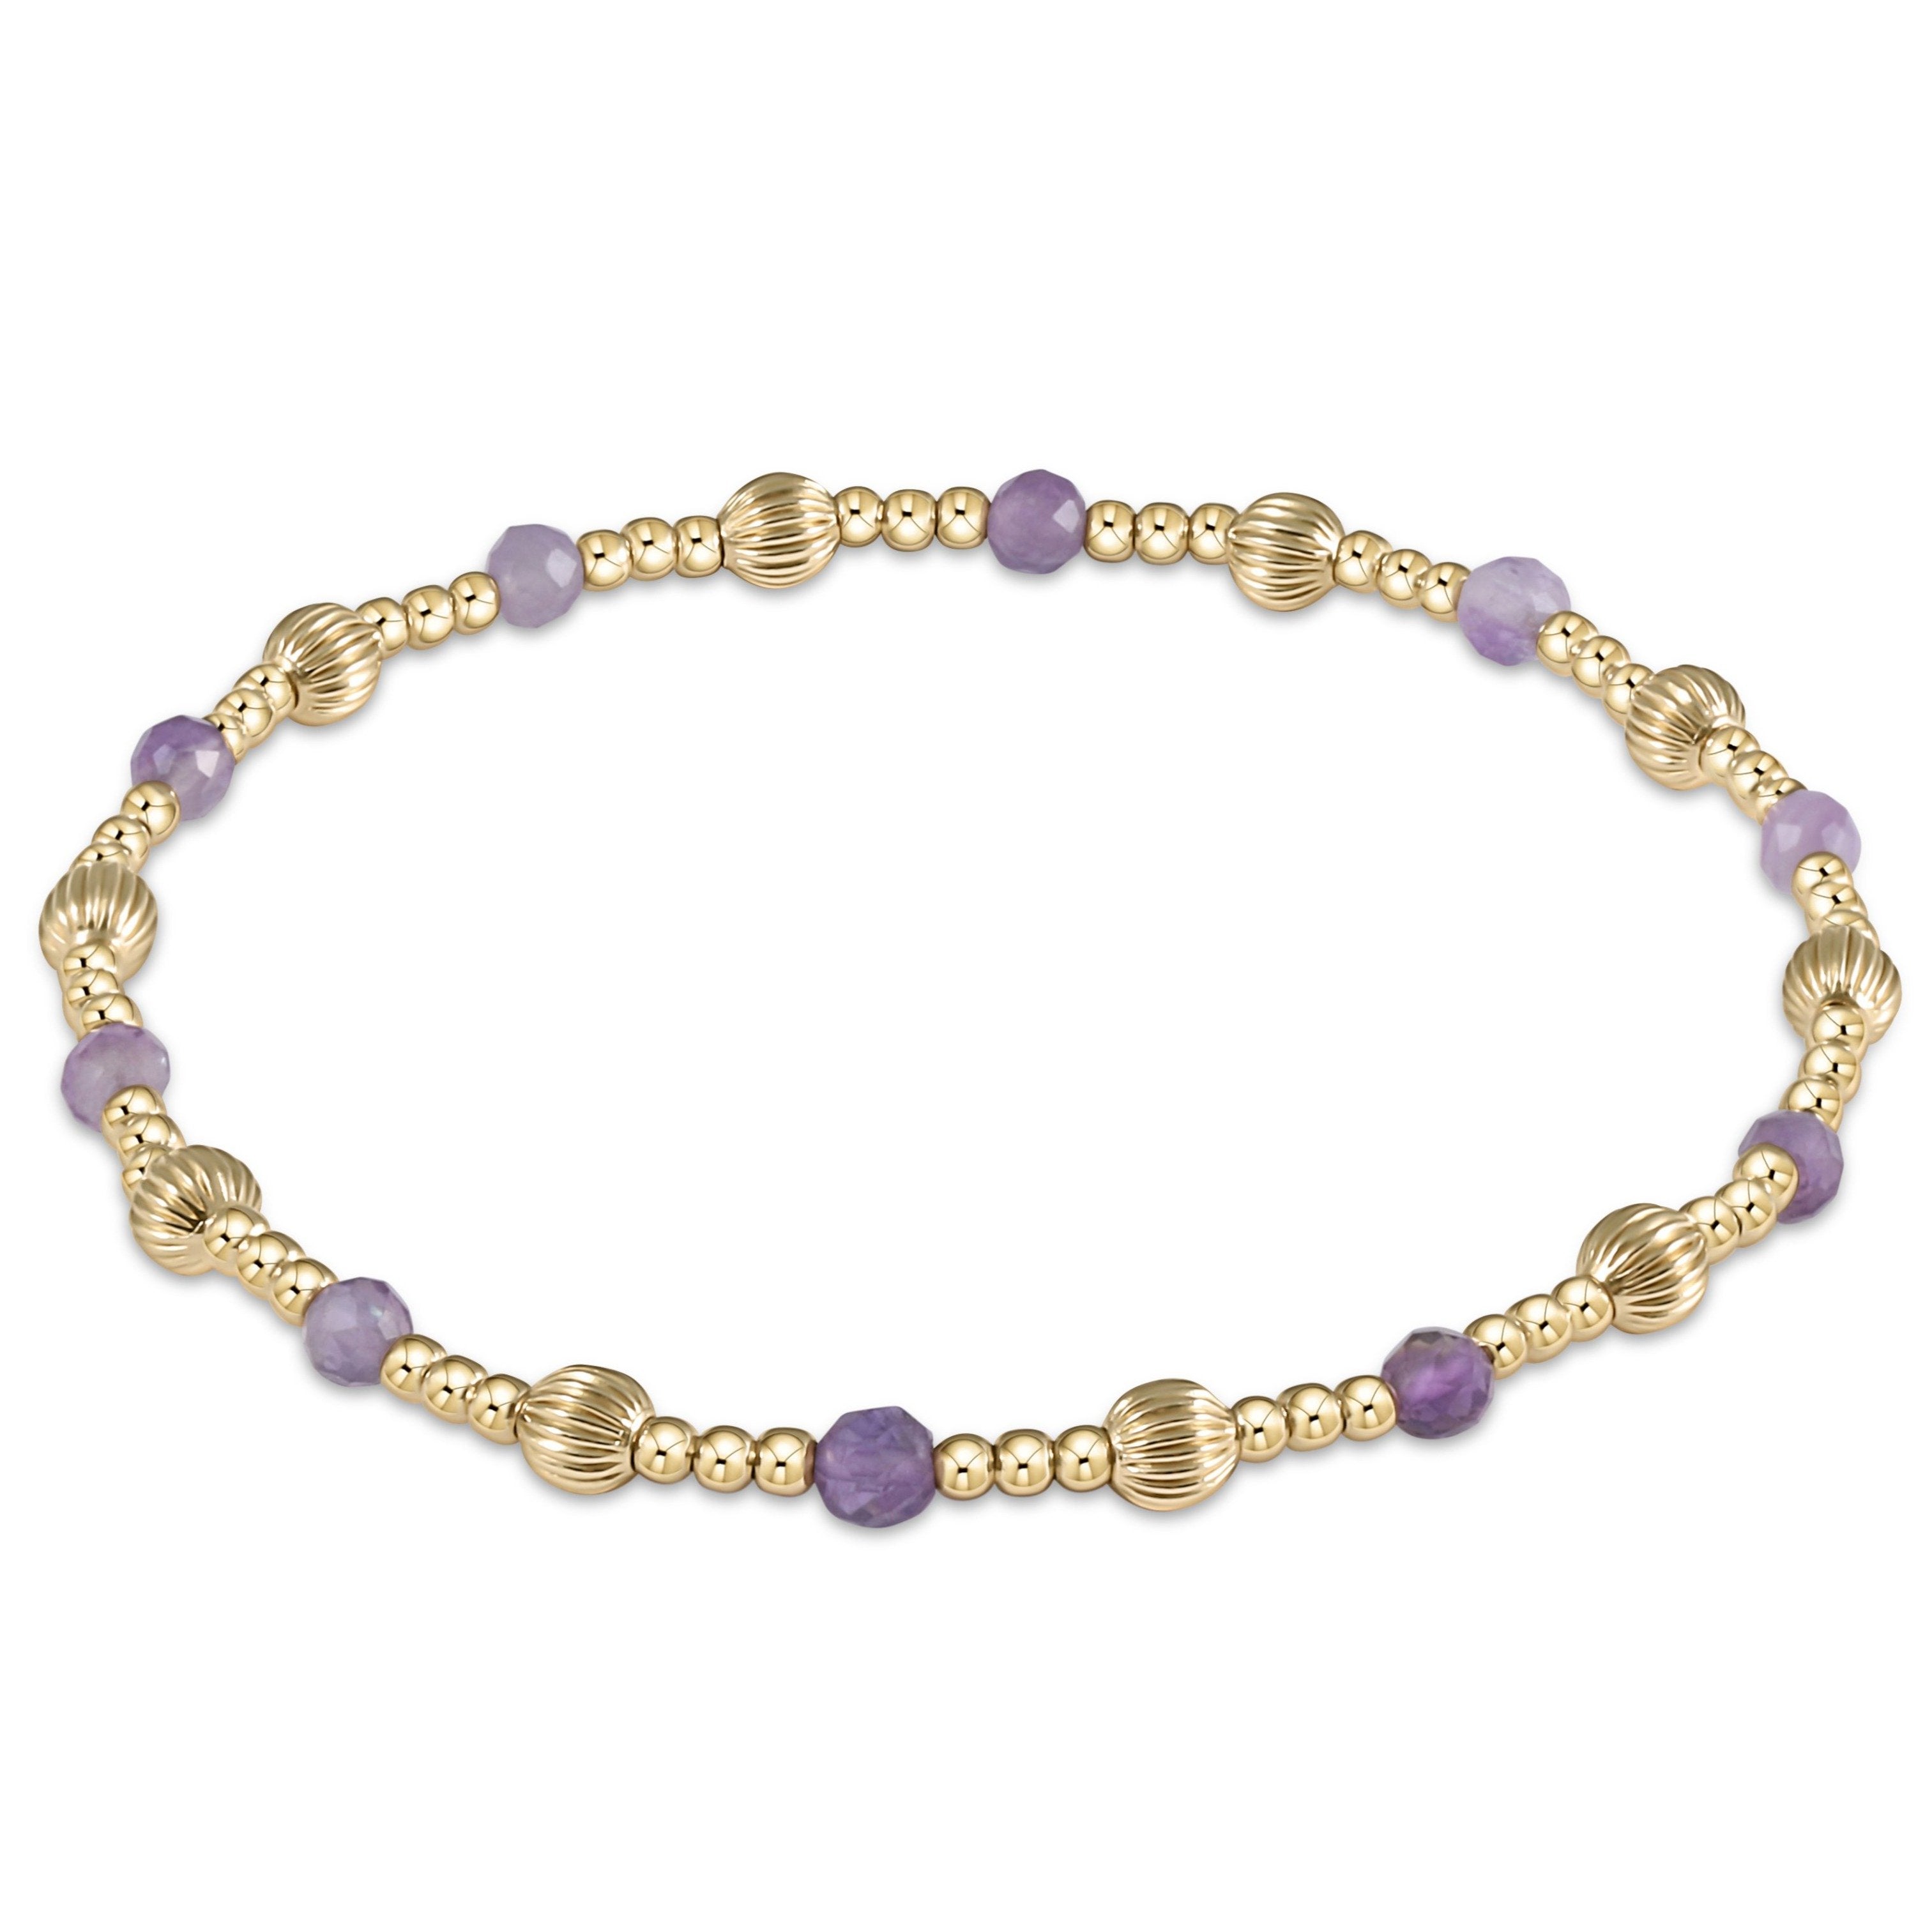 Dignity Sincerity Gold Bead Bracelet, 4mm - Dogtooth Amethyst